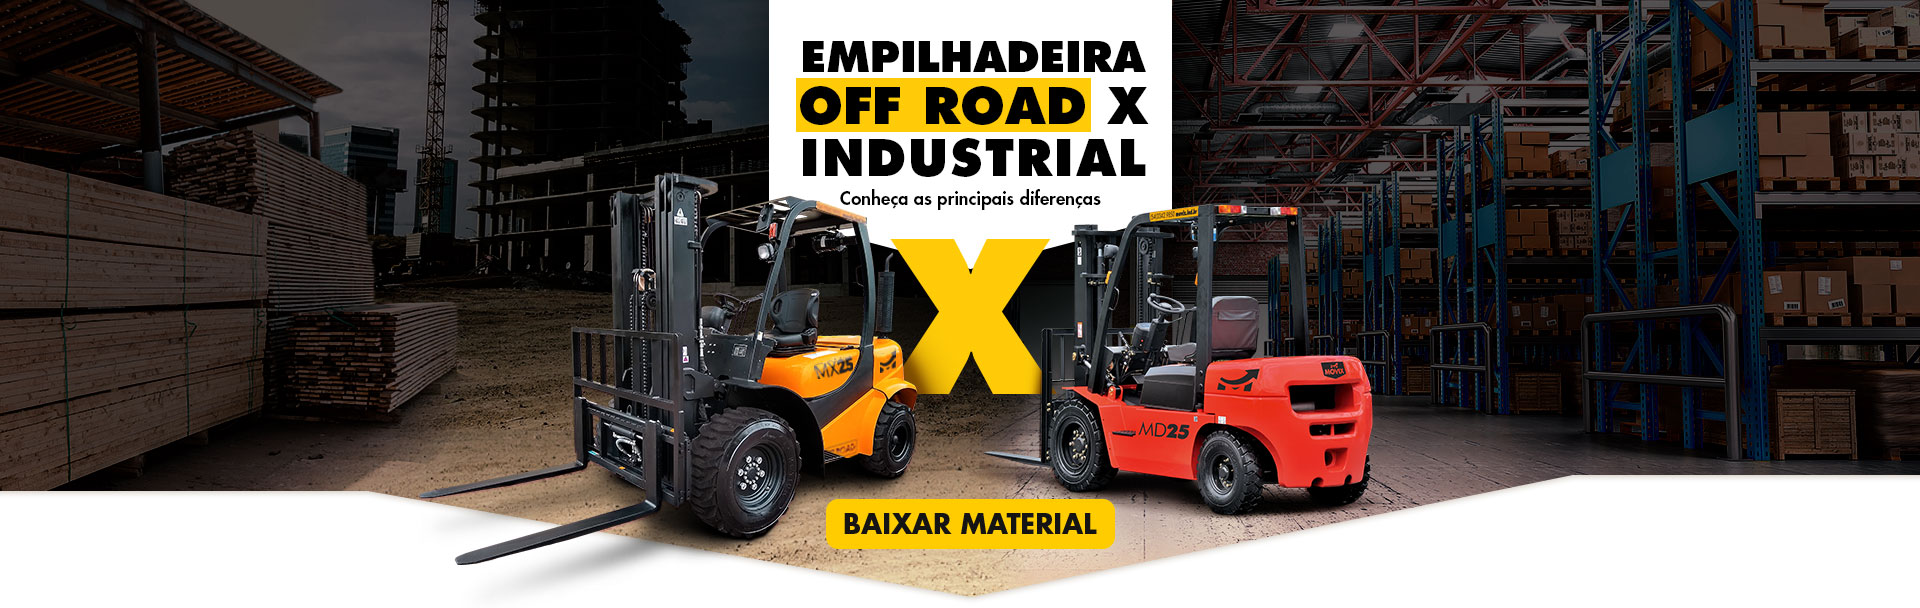 empilhadeira off road x industrial